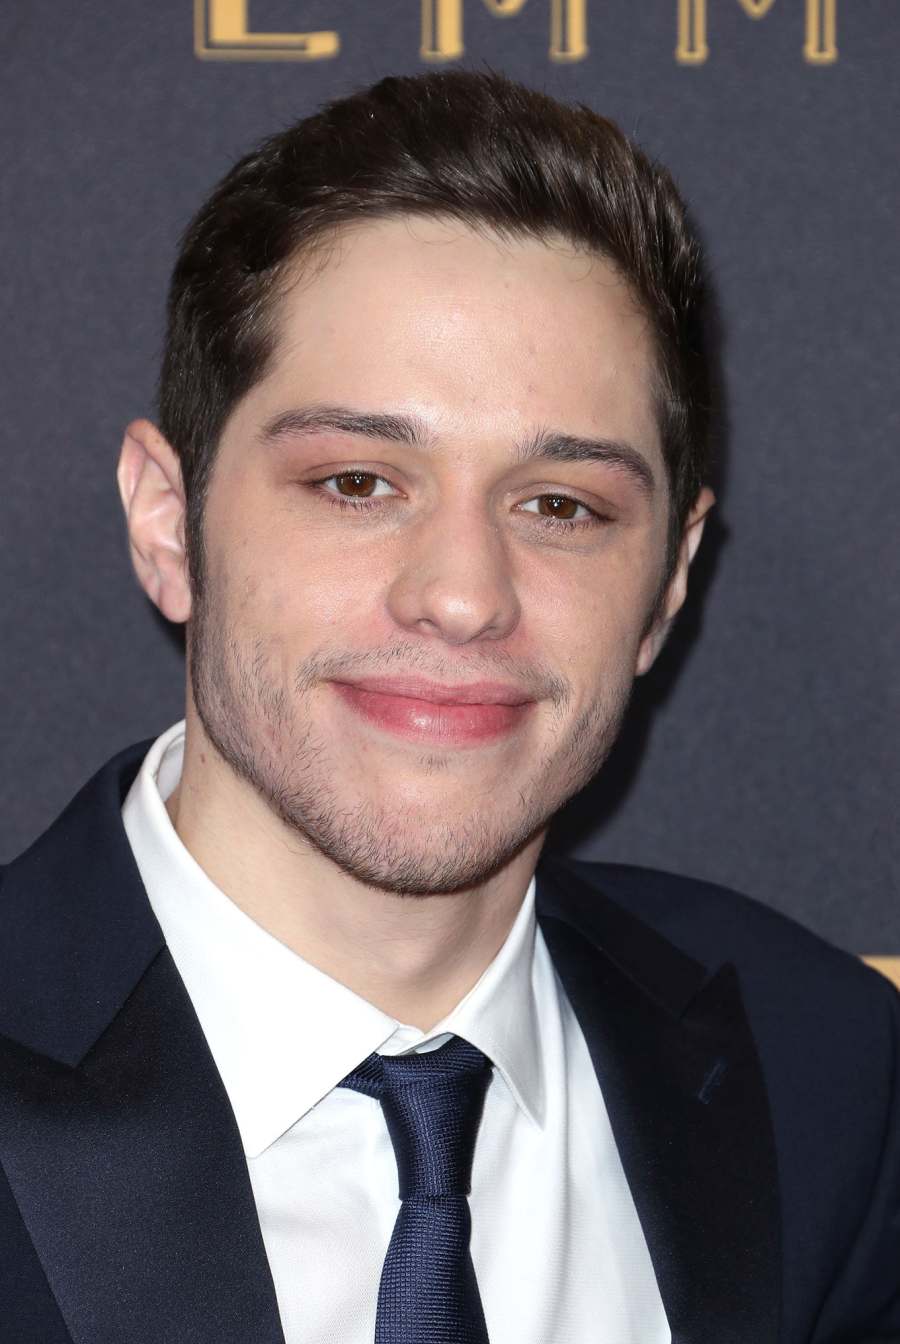 Happy at Home Pete Davidson Quotes About Having Kids Over the Years